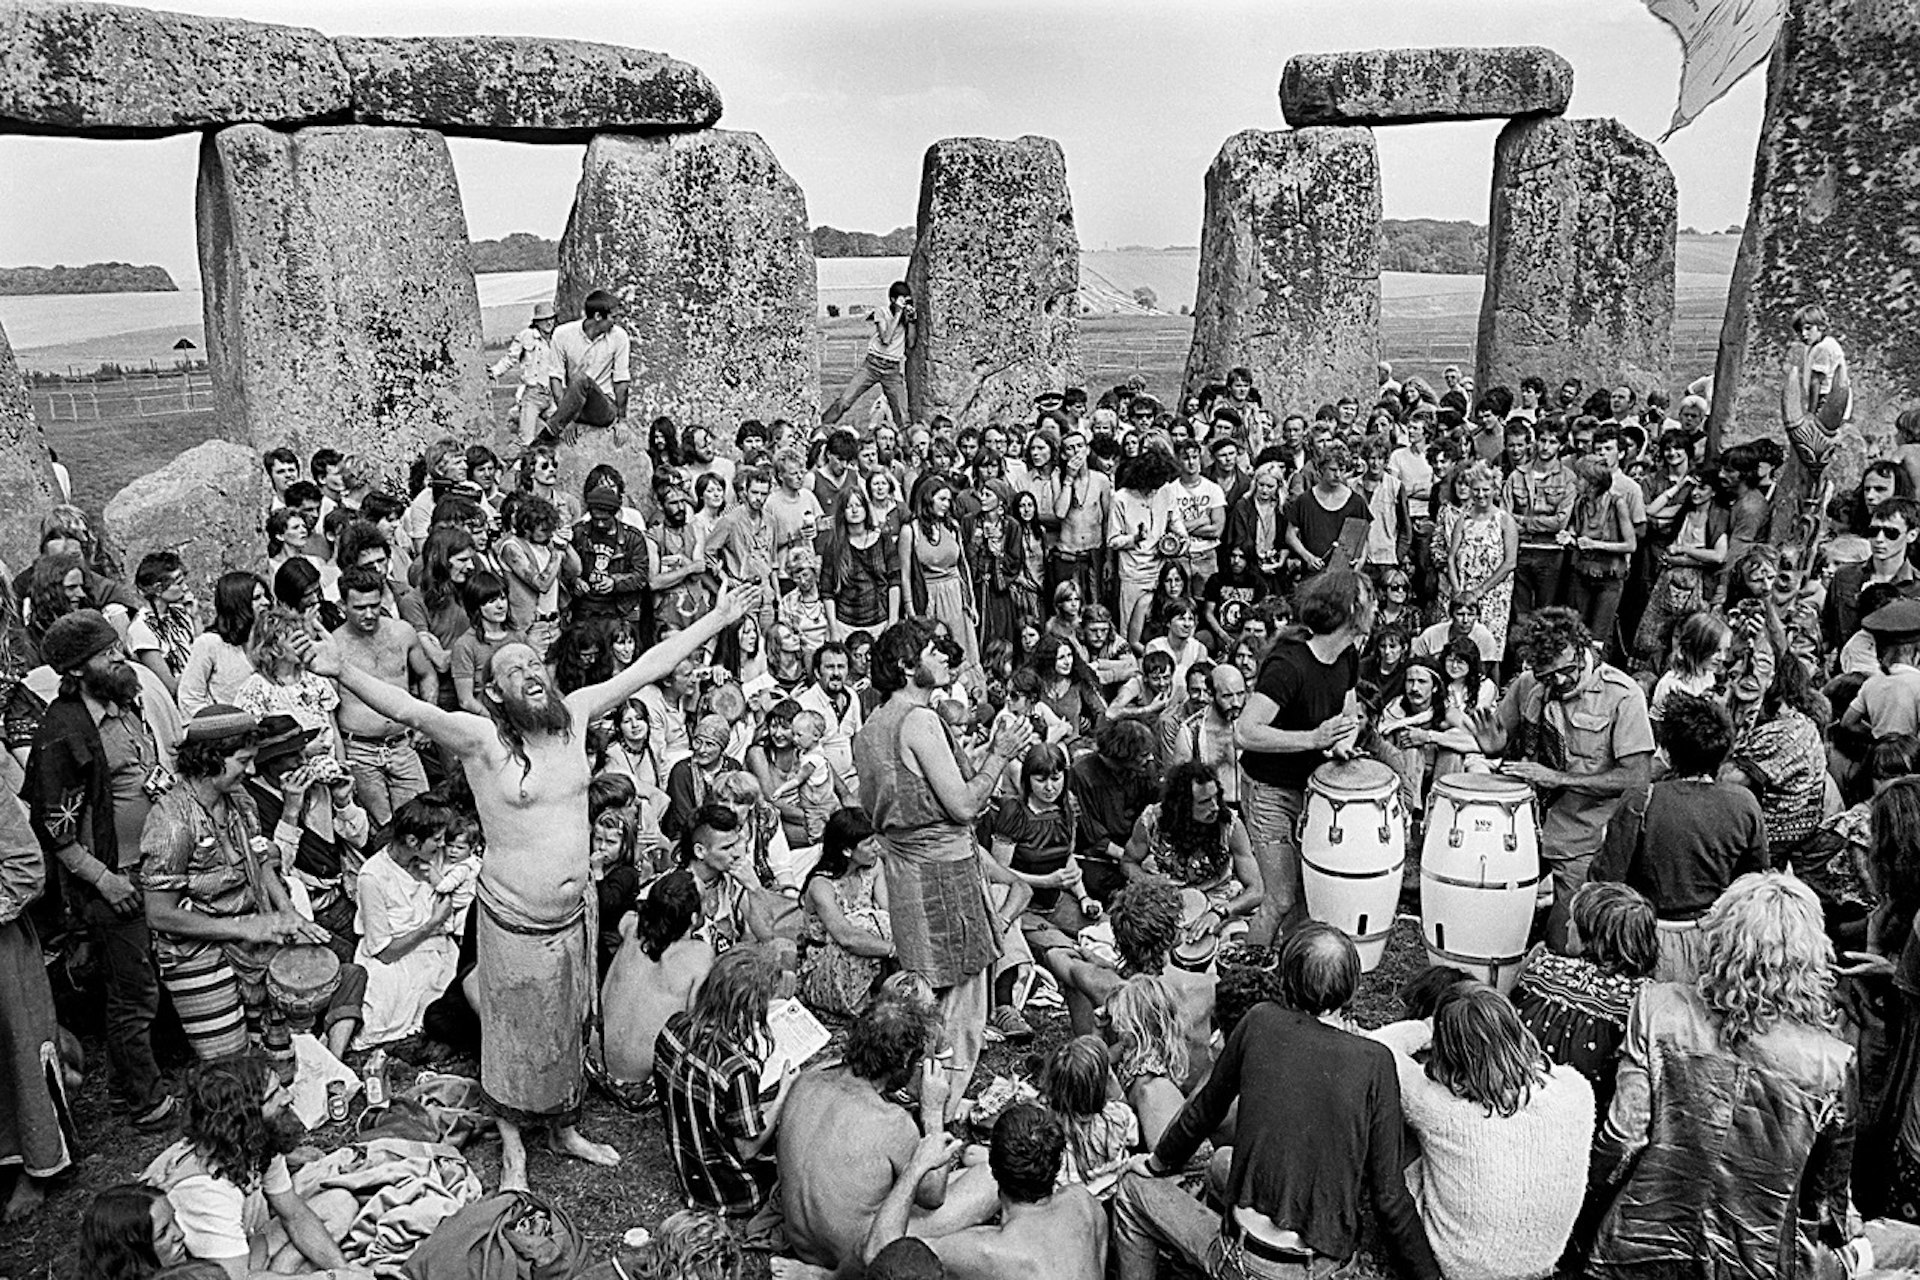 Halcyon days at an '80s Summer Solstice Festival